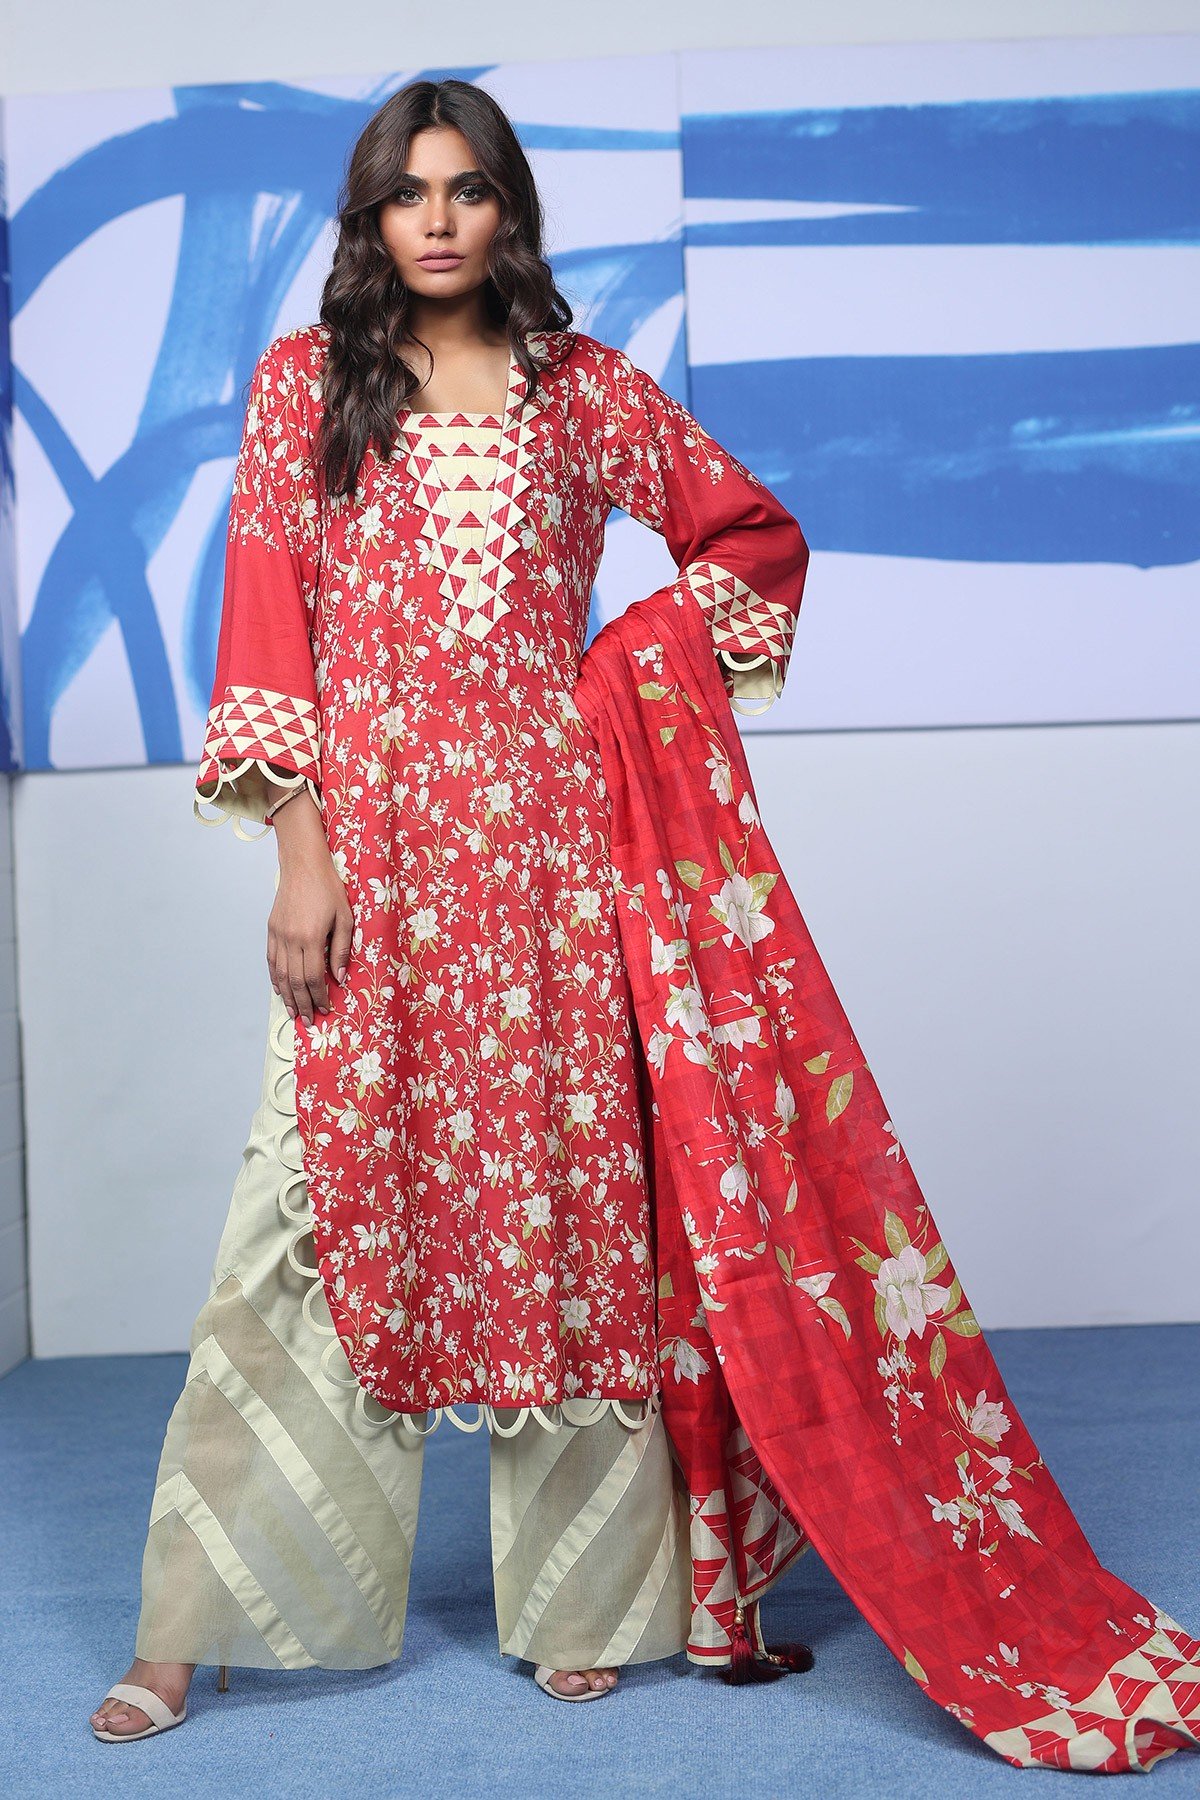 /2019/06/alkaram-studio-spring-summer-collection-3-piece-printed-suit-with-broshia-dupatta-ss-21-19-2-red-image1.jpeg